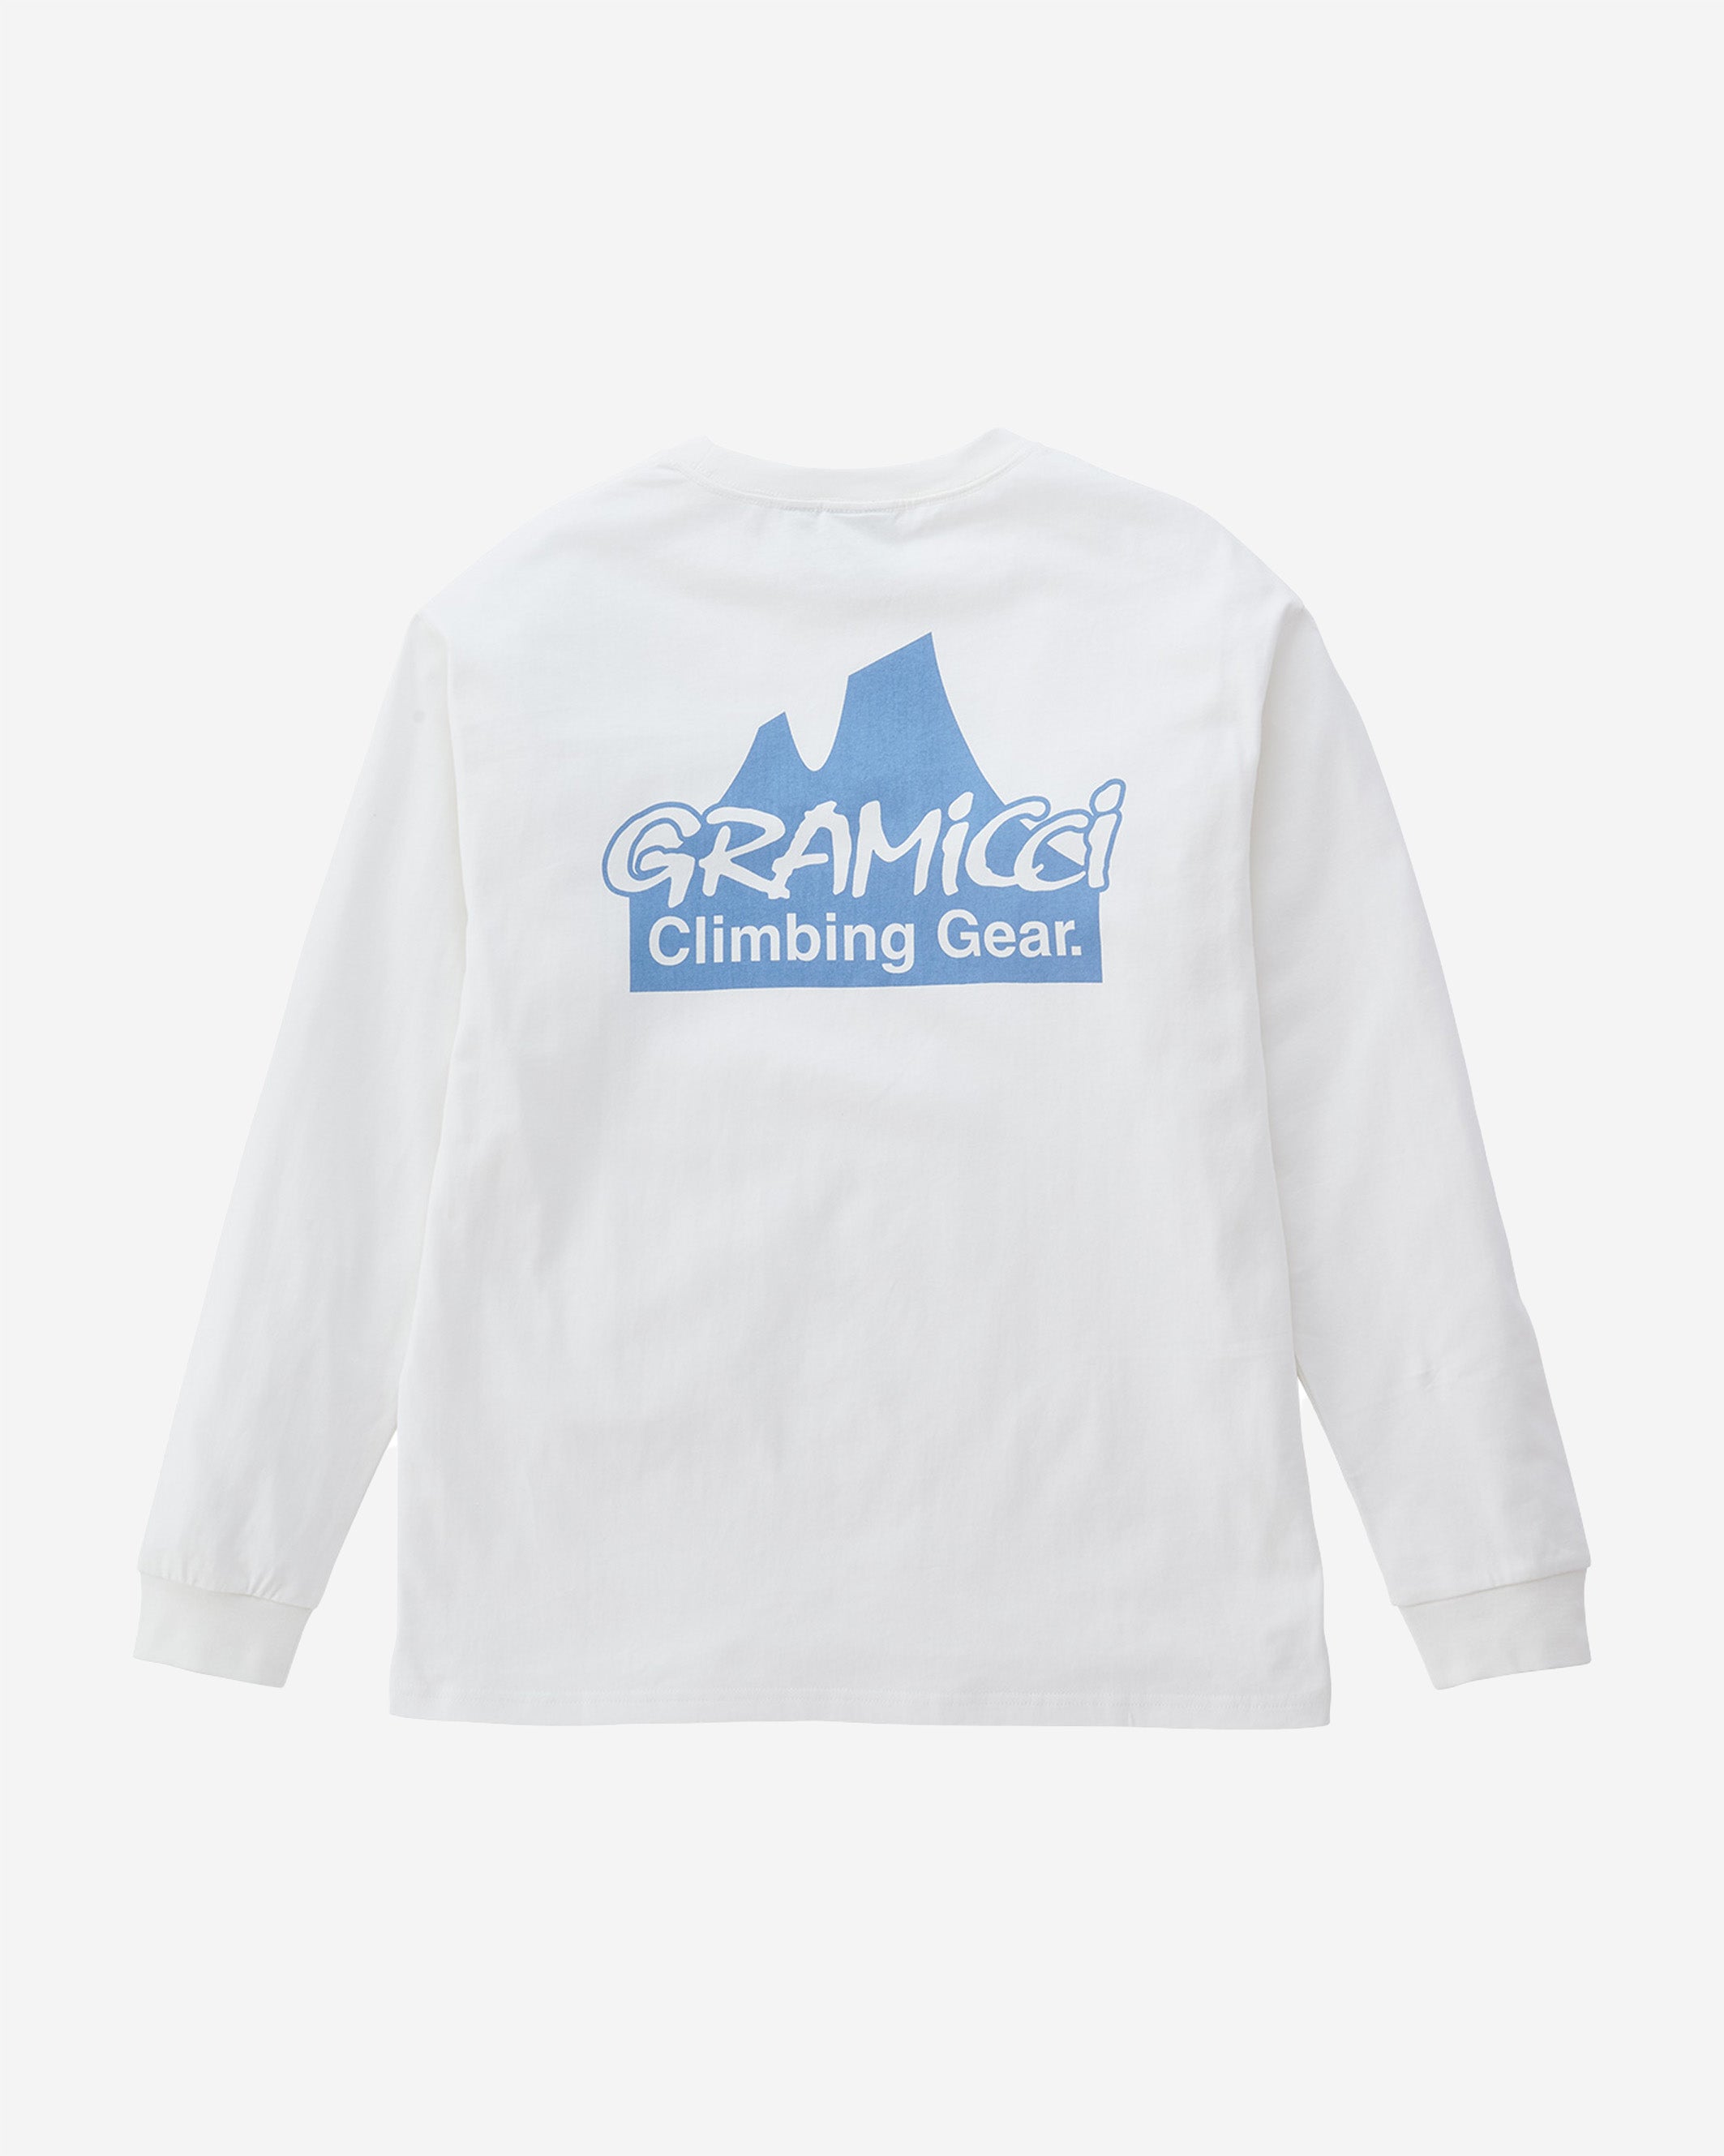 The Climbing Gear L/S Tee is made of dry-touch organic cotton that is soft and comfortable for outdoor activities or everyday wear. This long-sleeved t-shirt features a print of the silhouette of a mountain with the words "Climbing Gear" and the Gramicci logo.